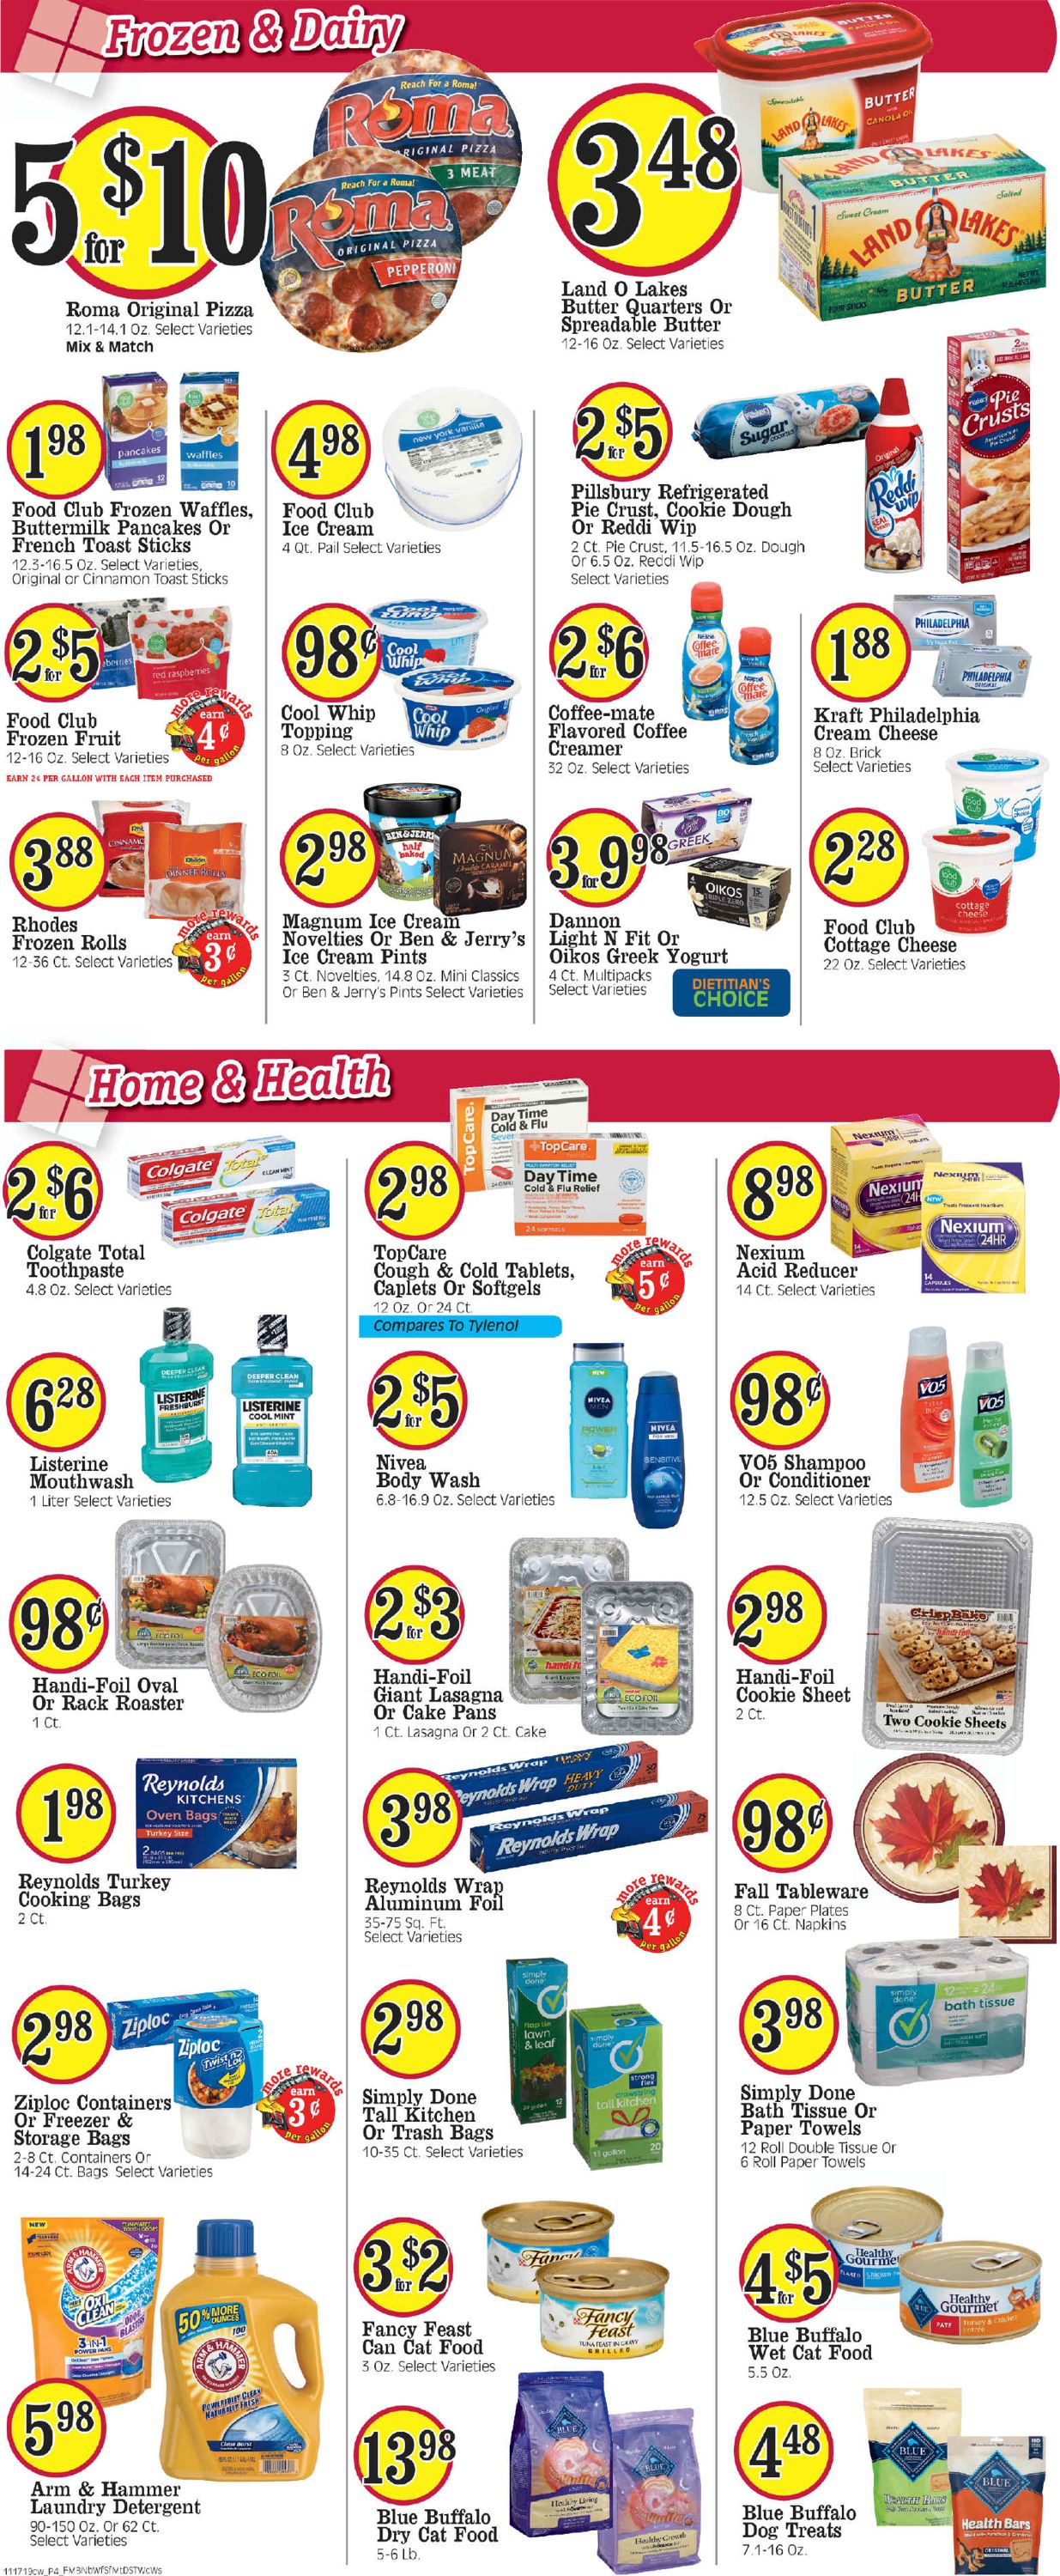 Cash Wise - Thanksgiving Ad 2019 Weekly Ad Circular - valid 11/20-11/26/2019 (Page 4)